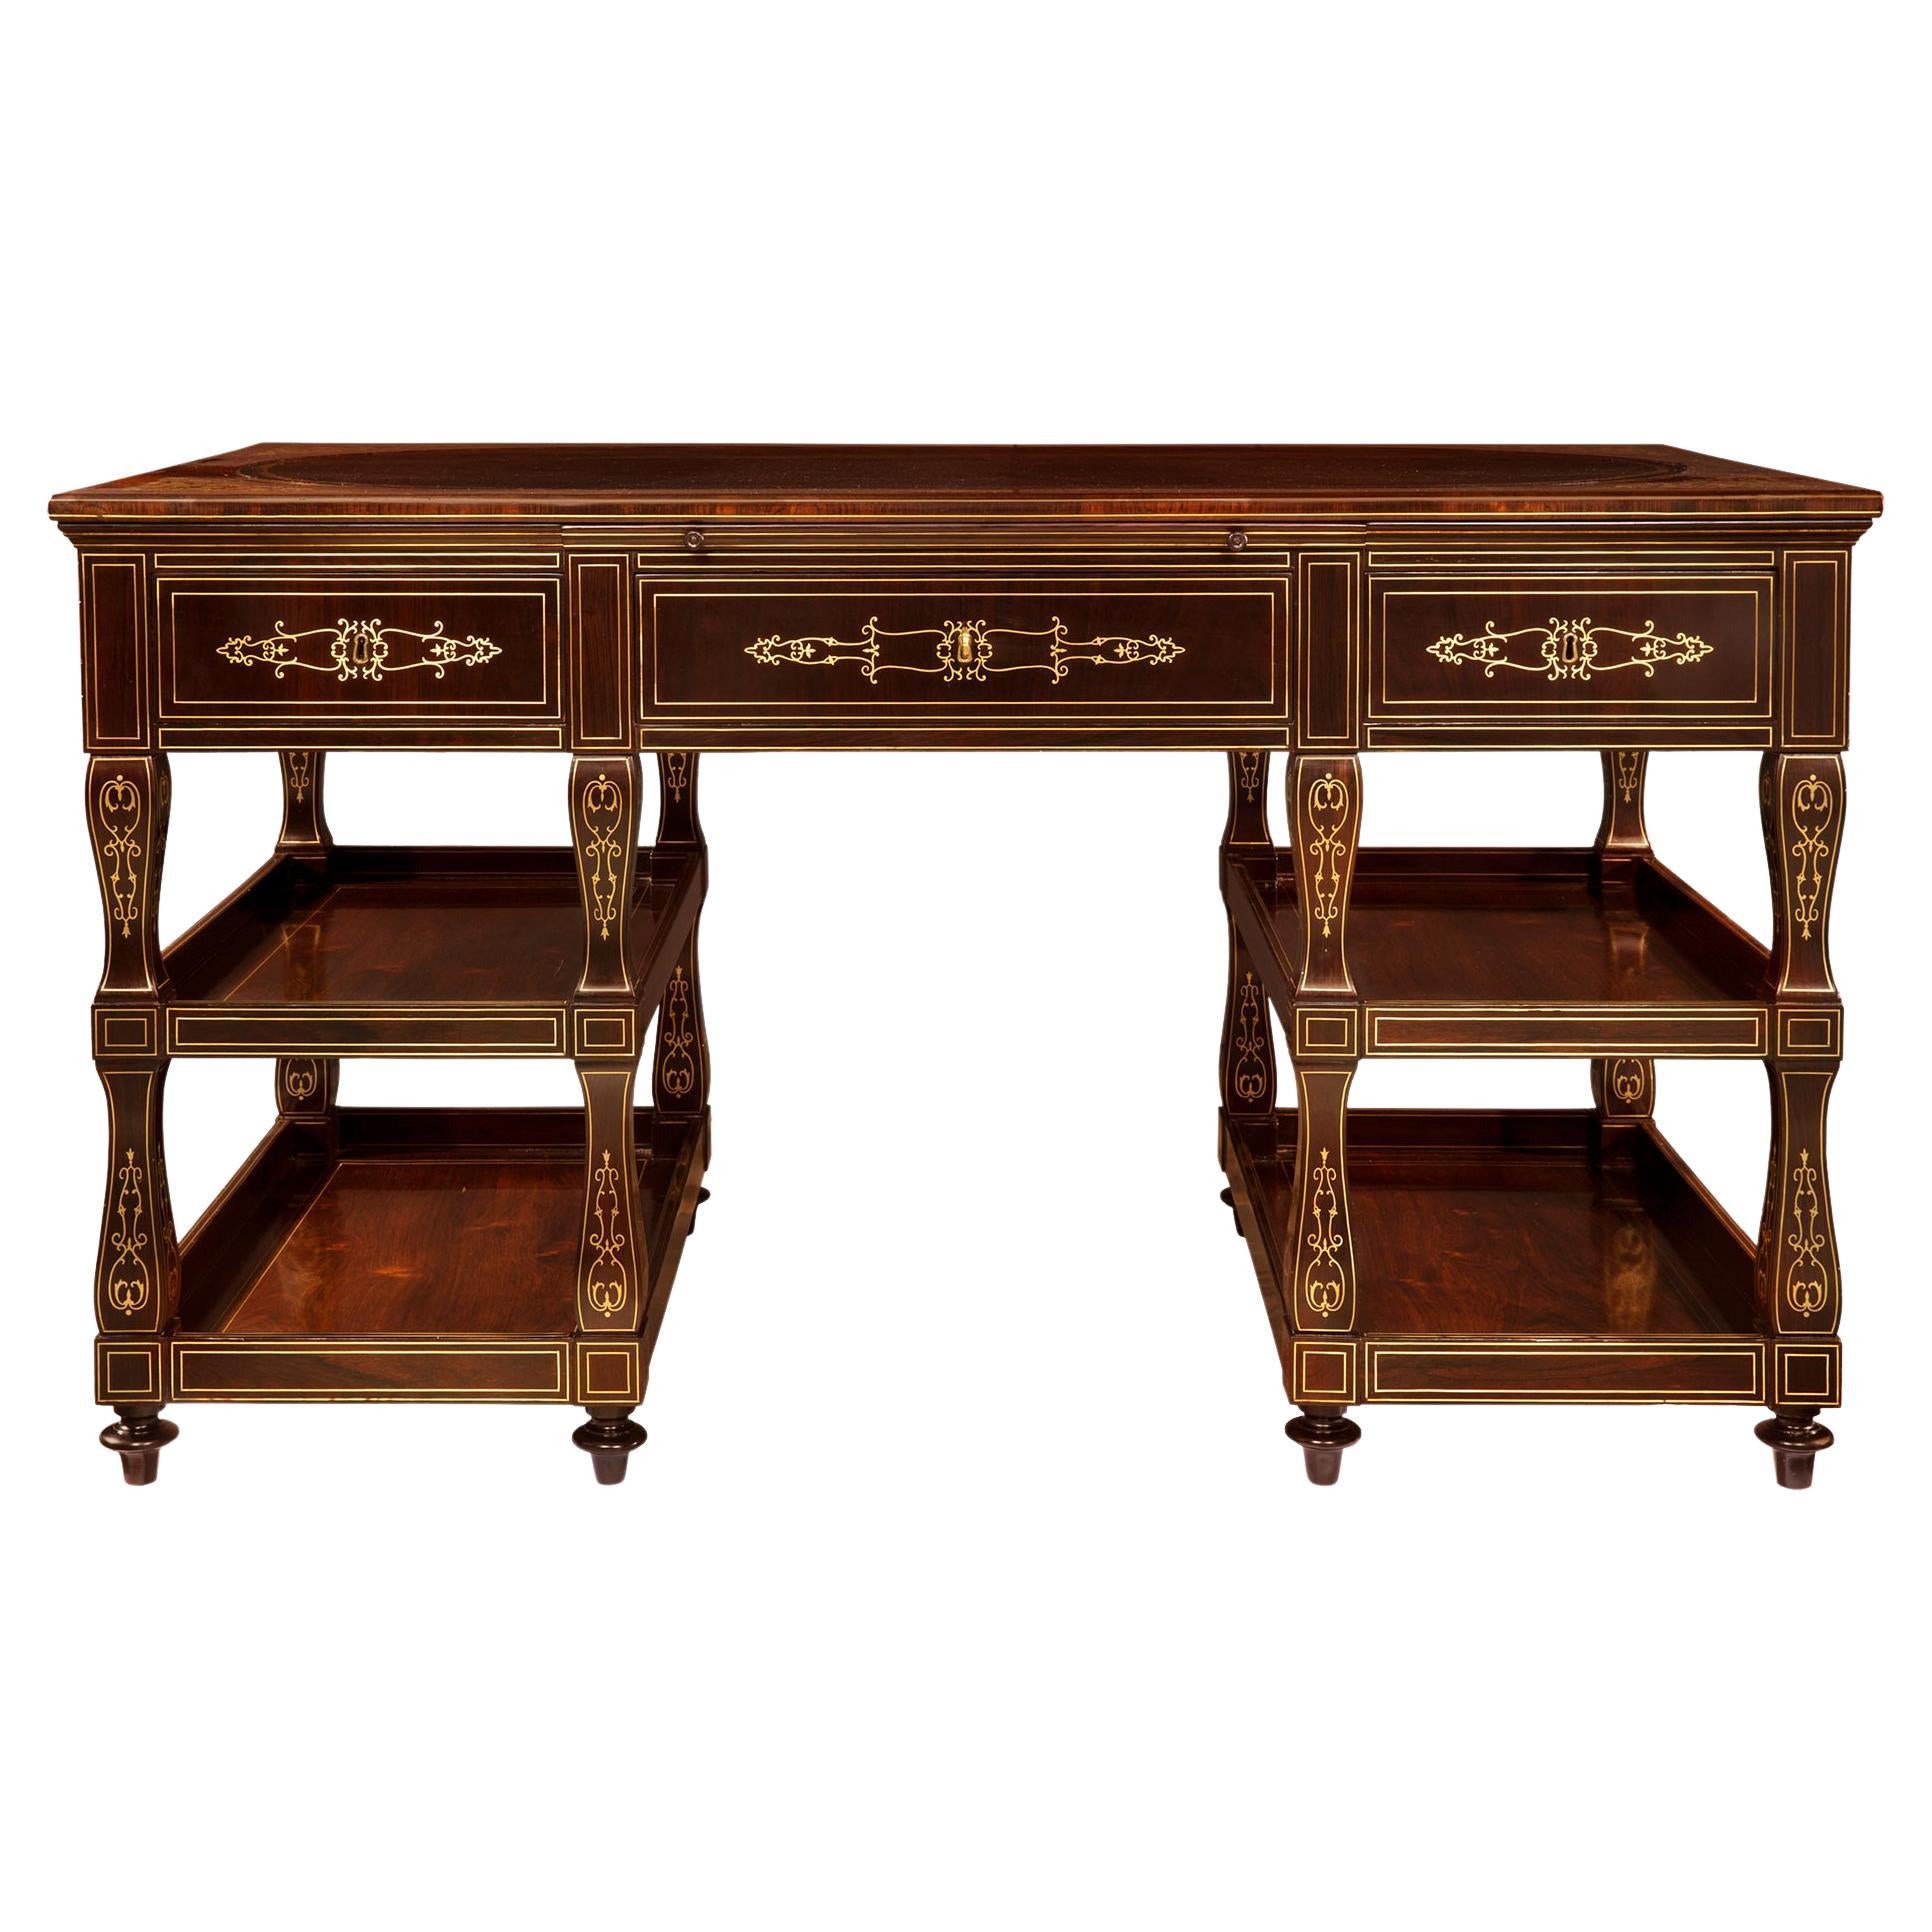 French 19th Century Charles X Period Rosewood and Brass Inlaid Desk